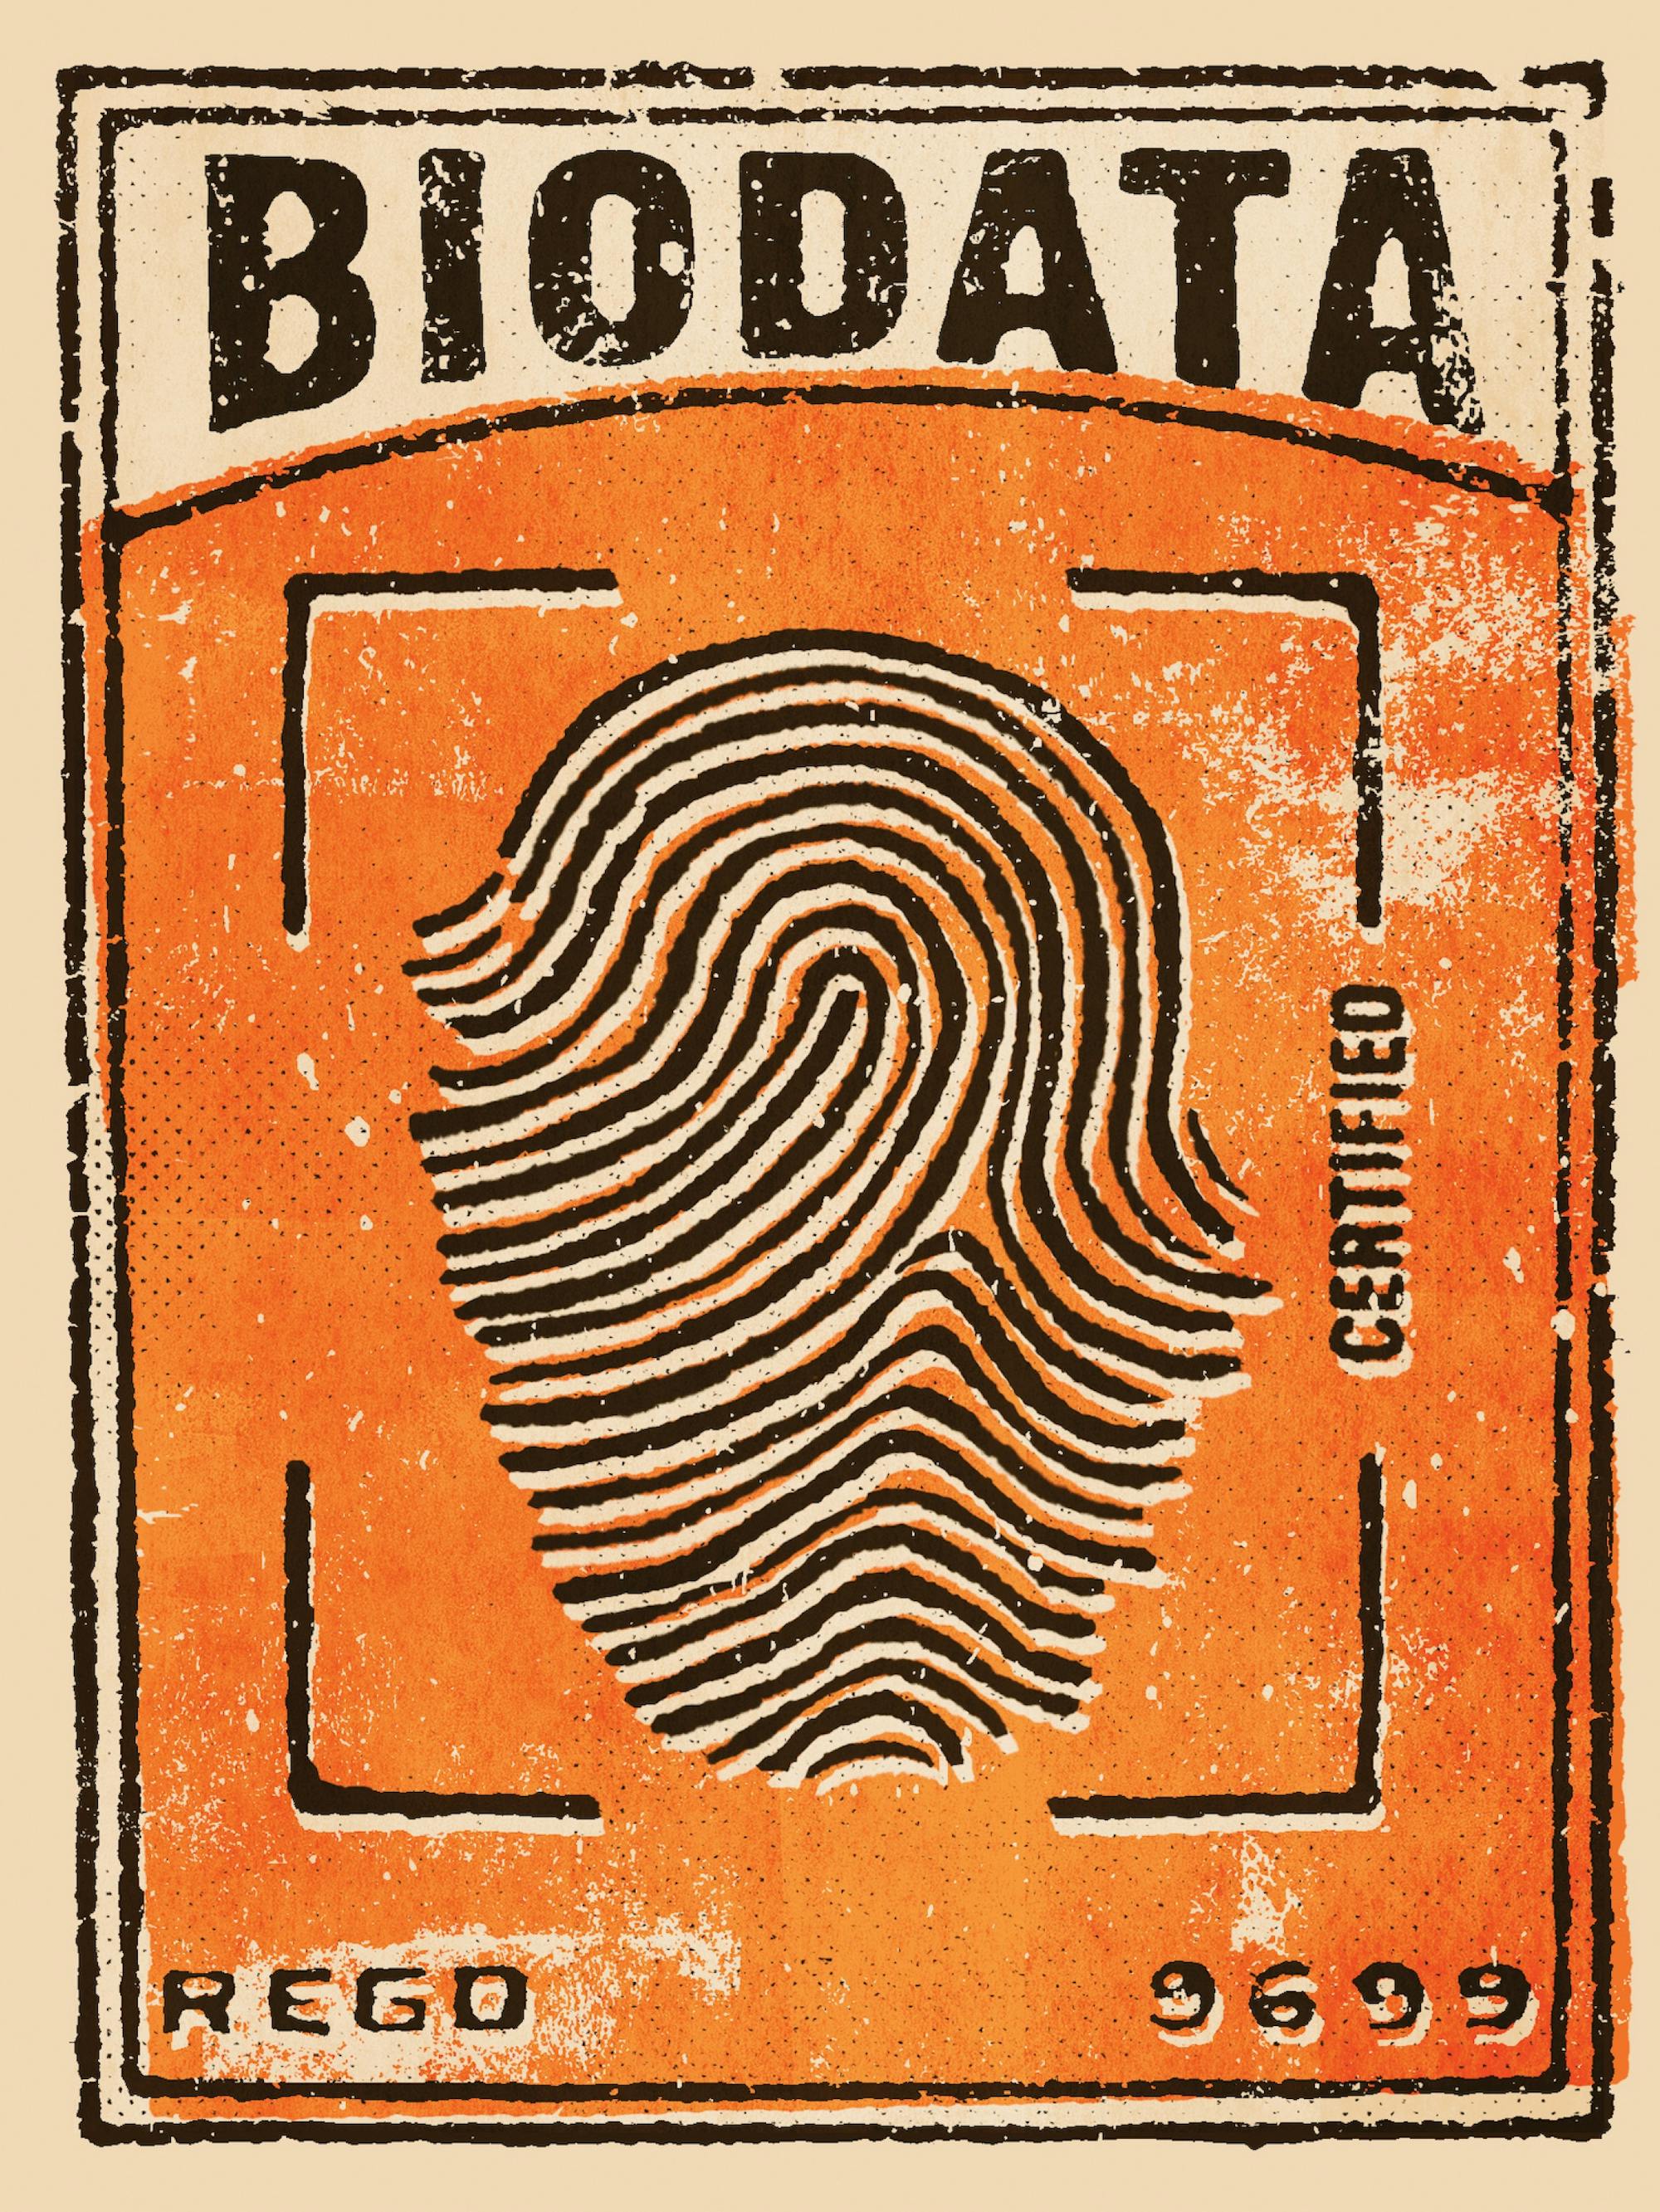 This image shows a fingerprint, against an orange background. The words ‘certified’ edge the left side, and ‘biodata’ reads above. 